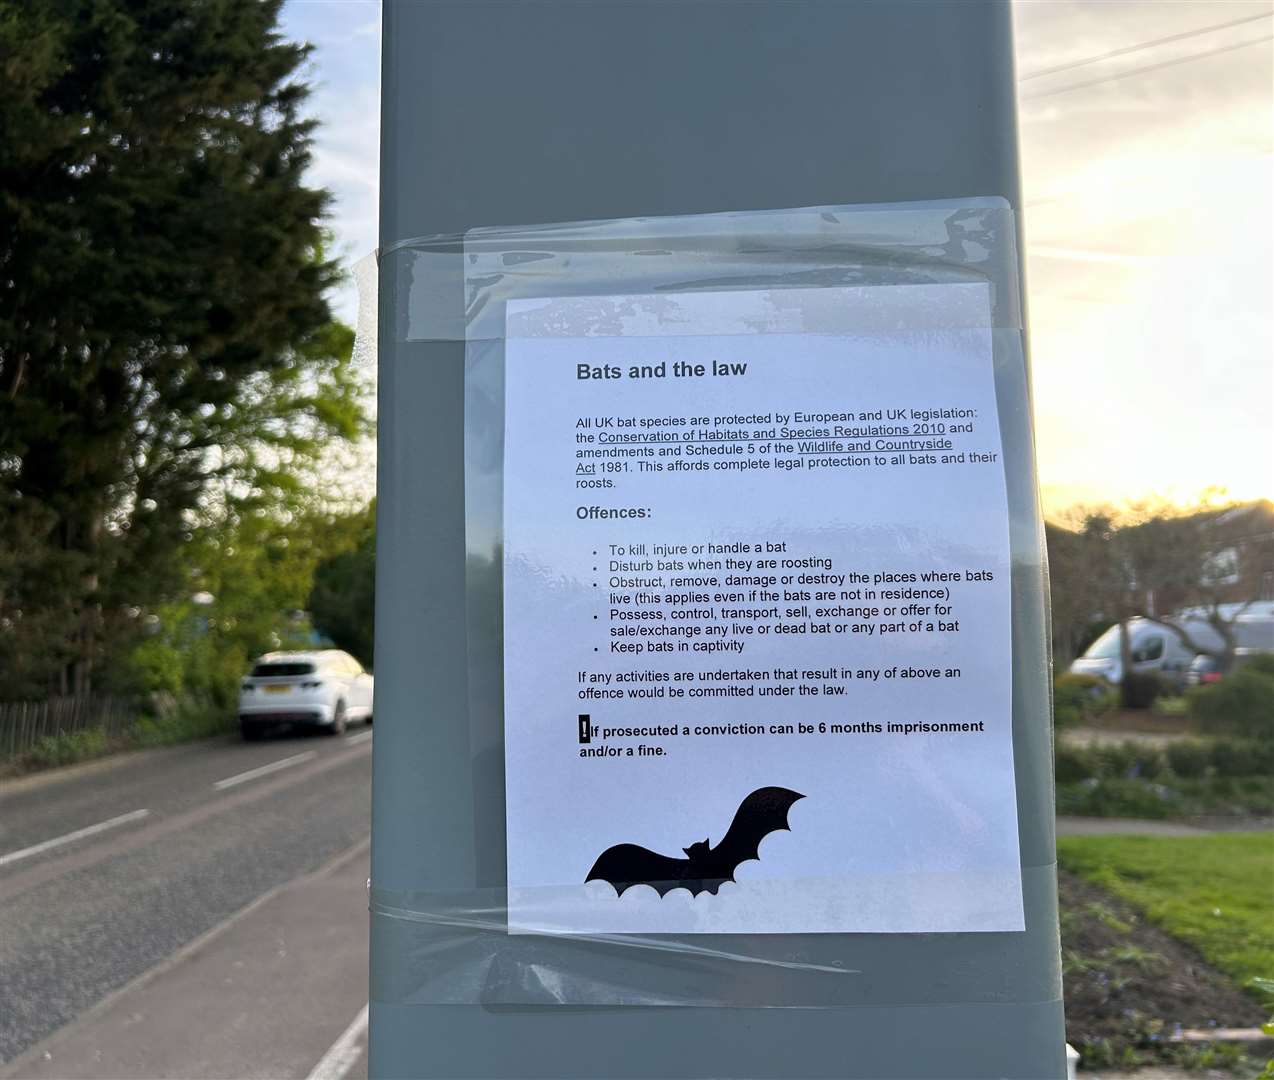 The vandal taped information about Uk bat law to the speed camera